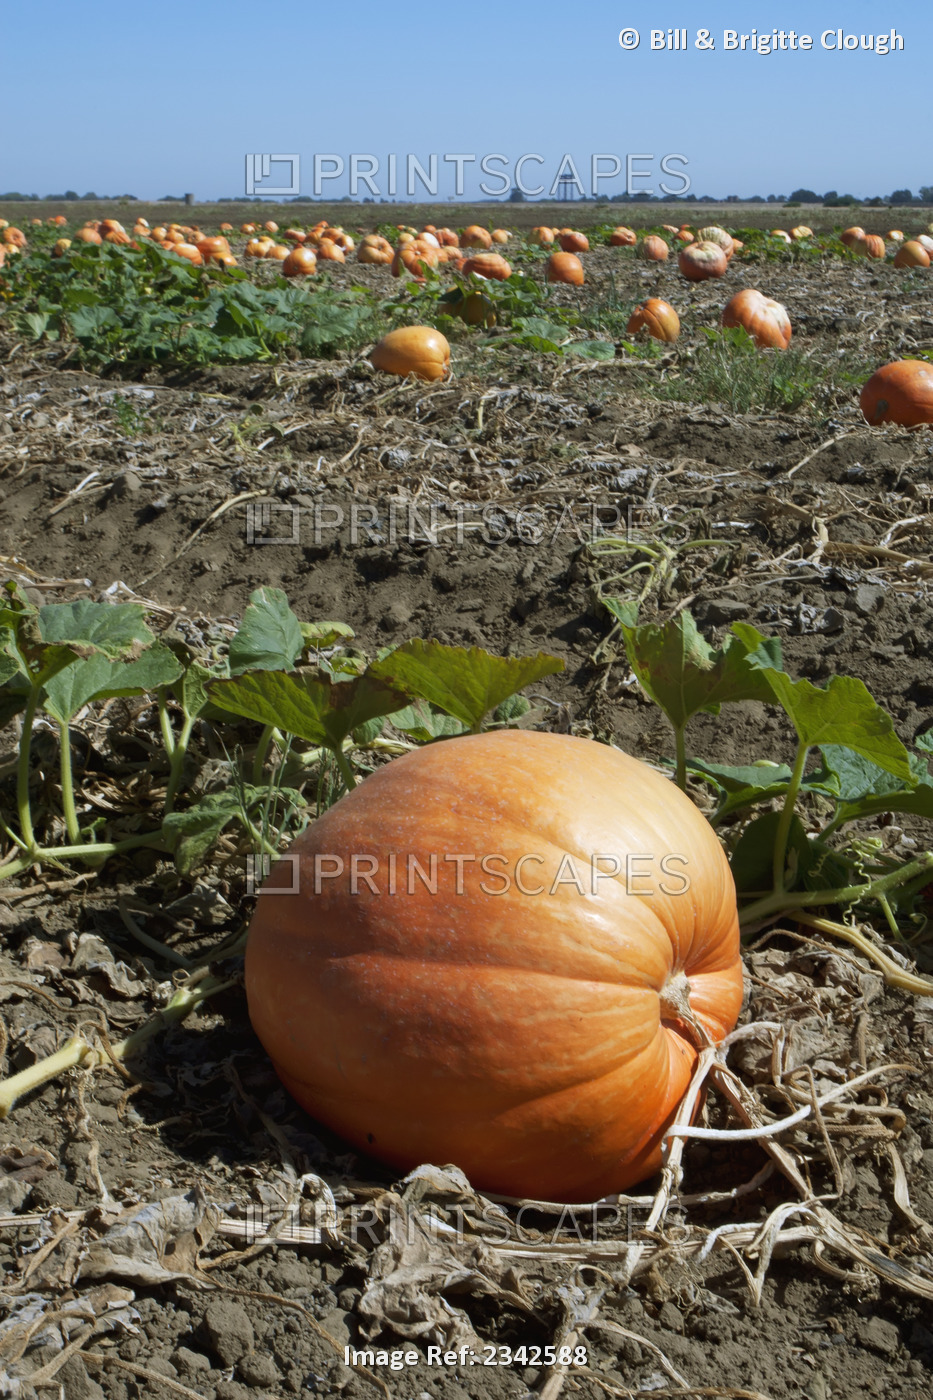 Agriculture - Field of mature giant pumpkins ready for harvest / Near Lathrop, ...